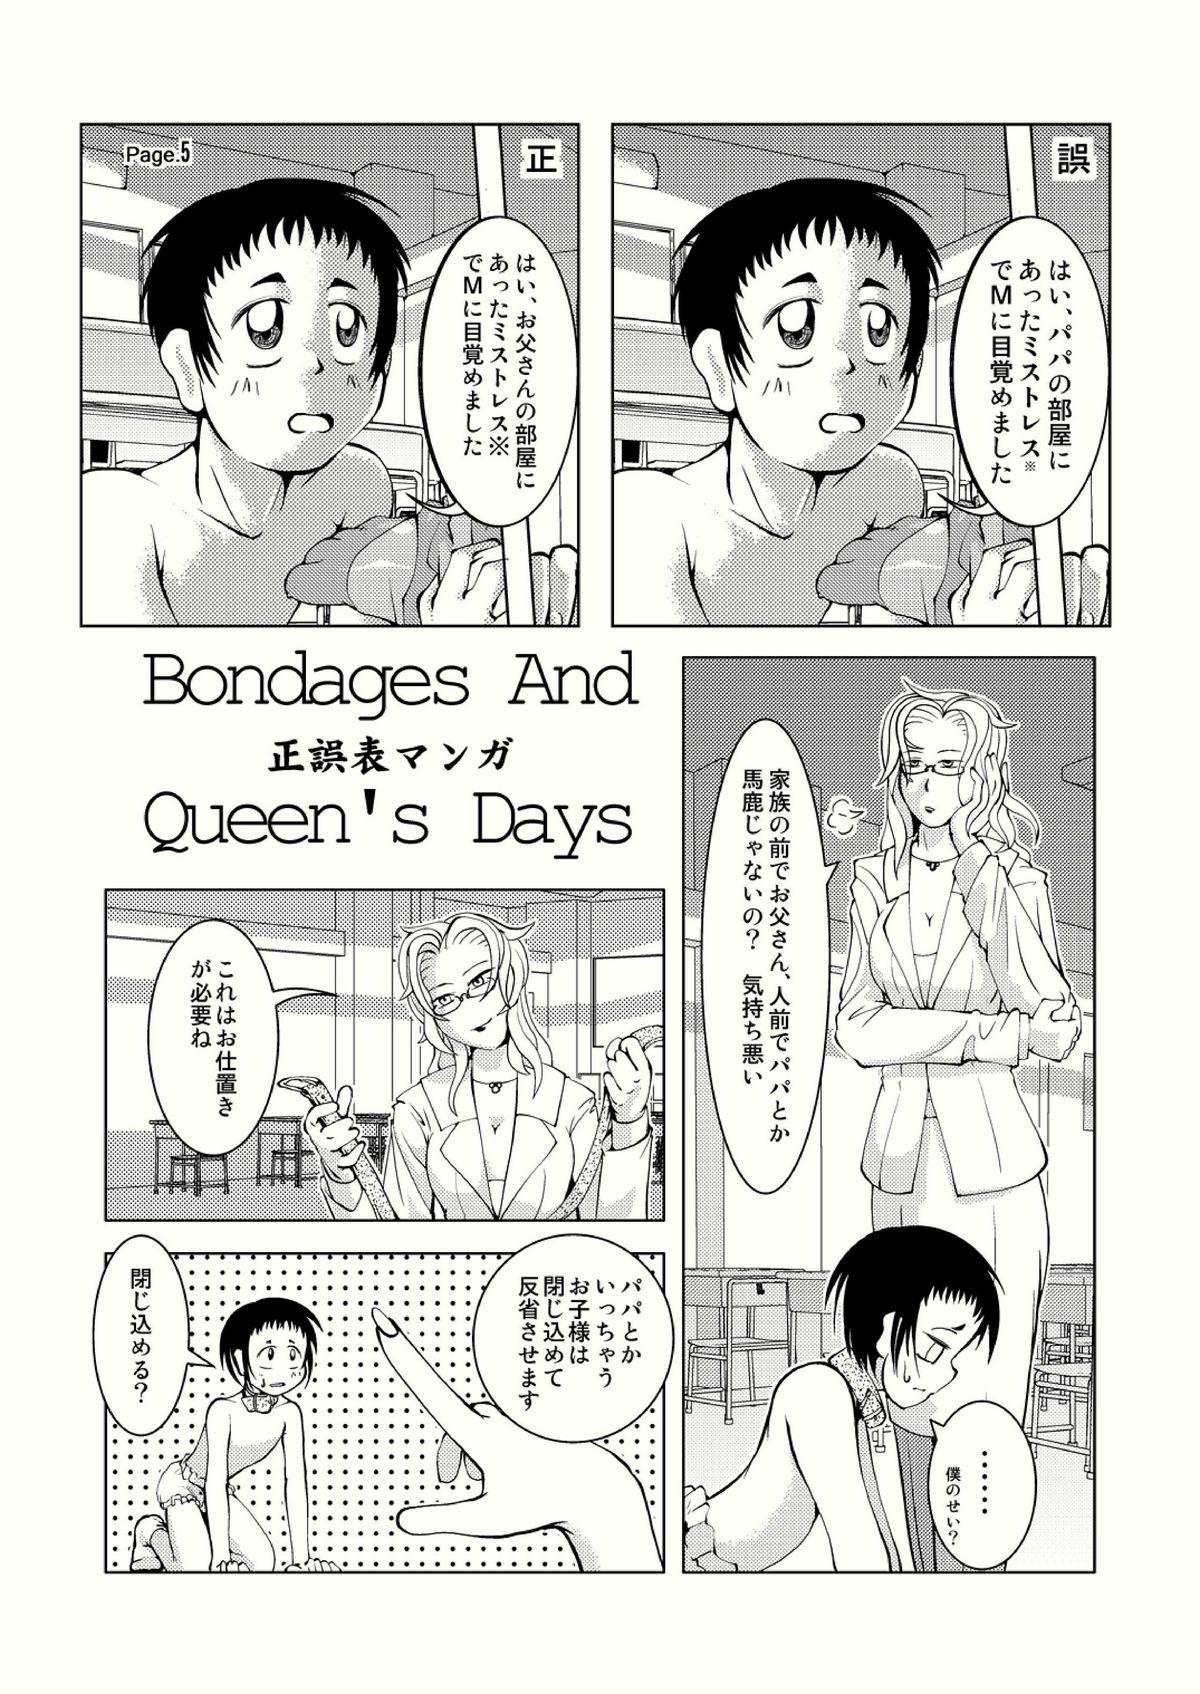 Eat Bondages and Queens Days Dick Suckers - Page 43